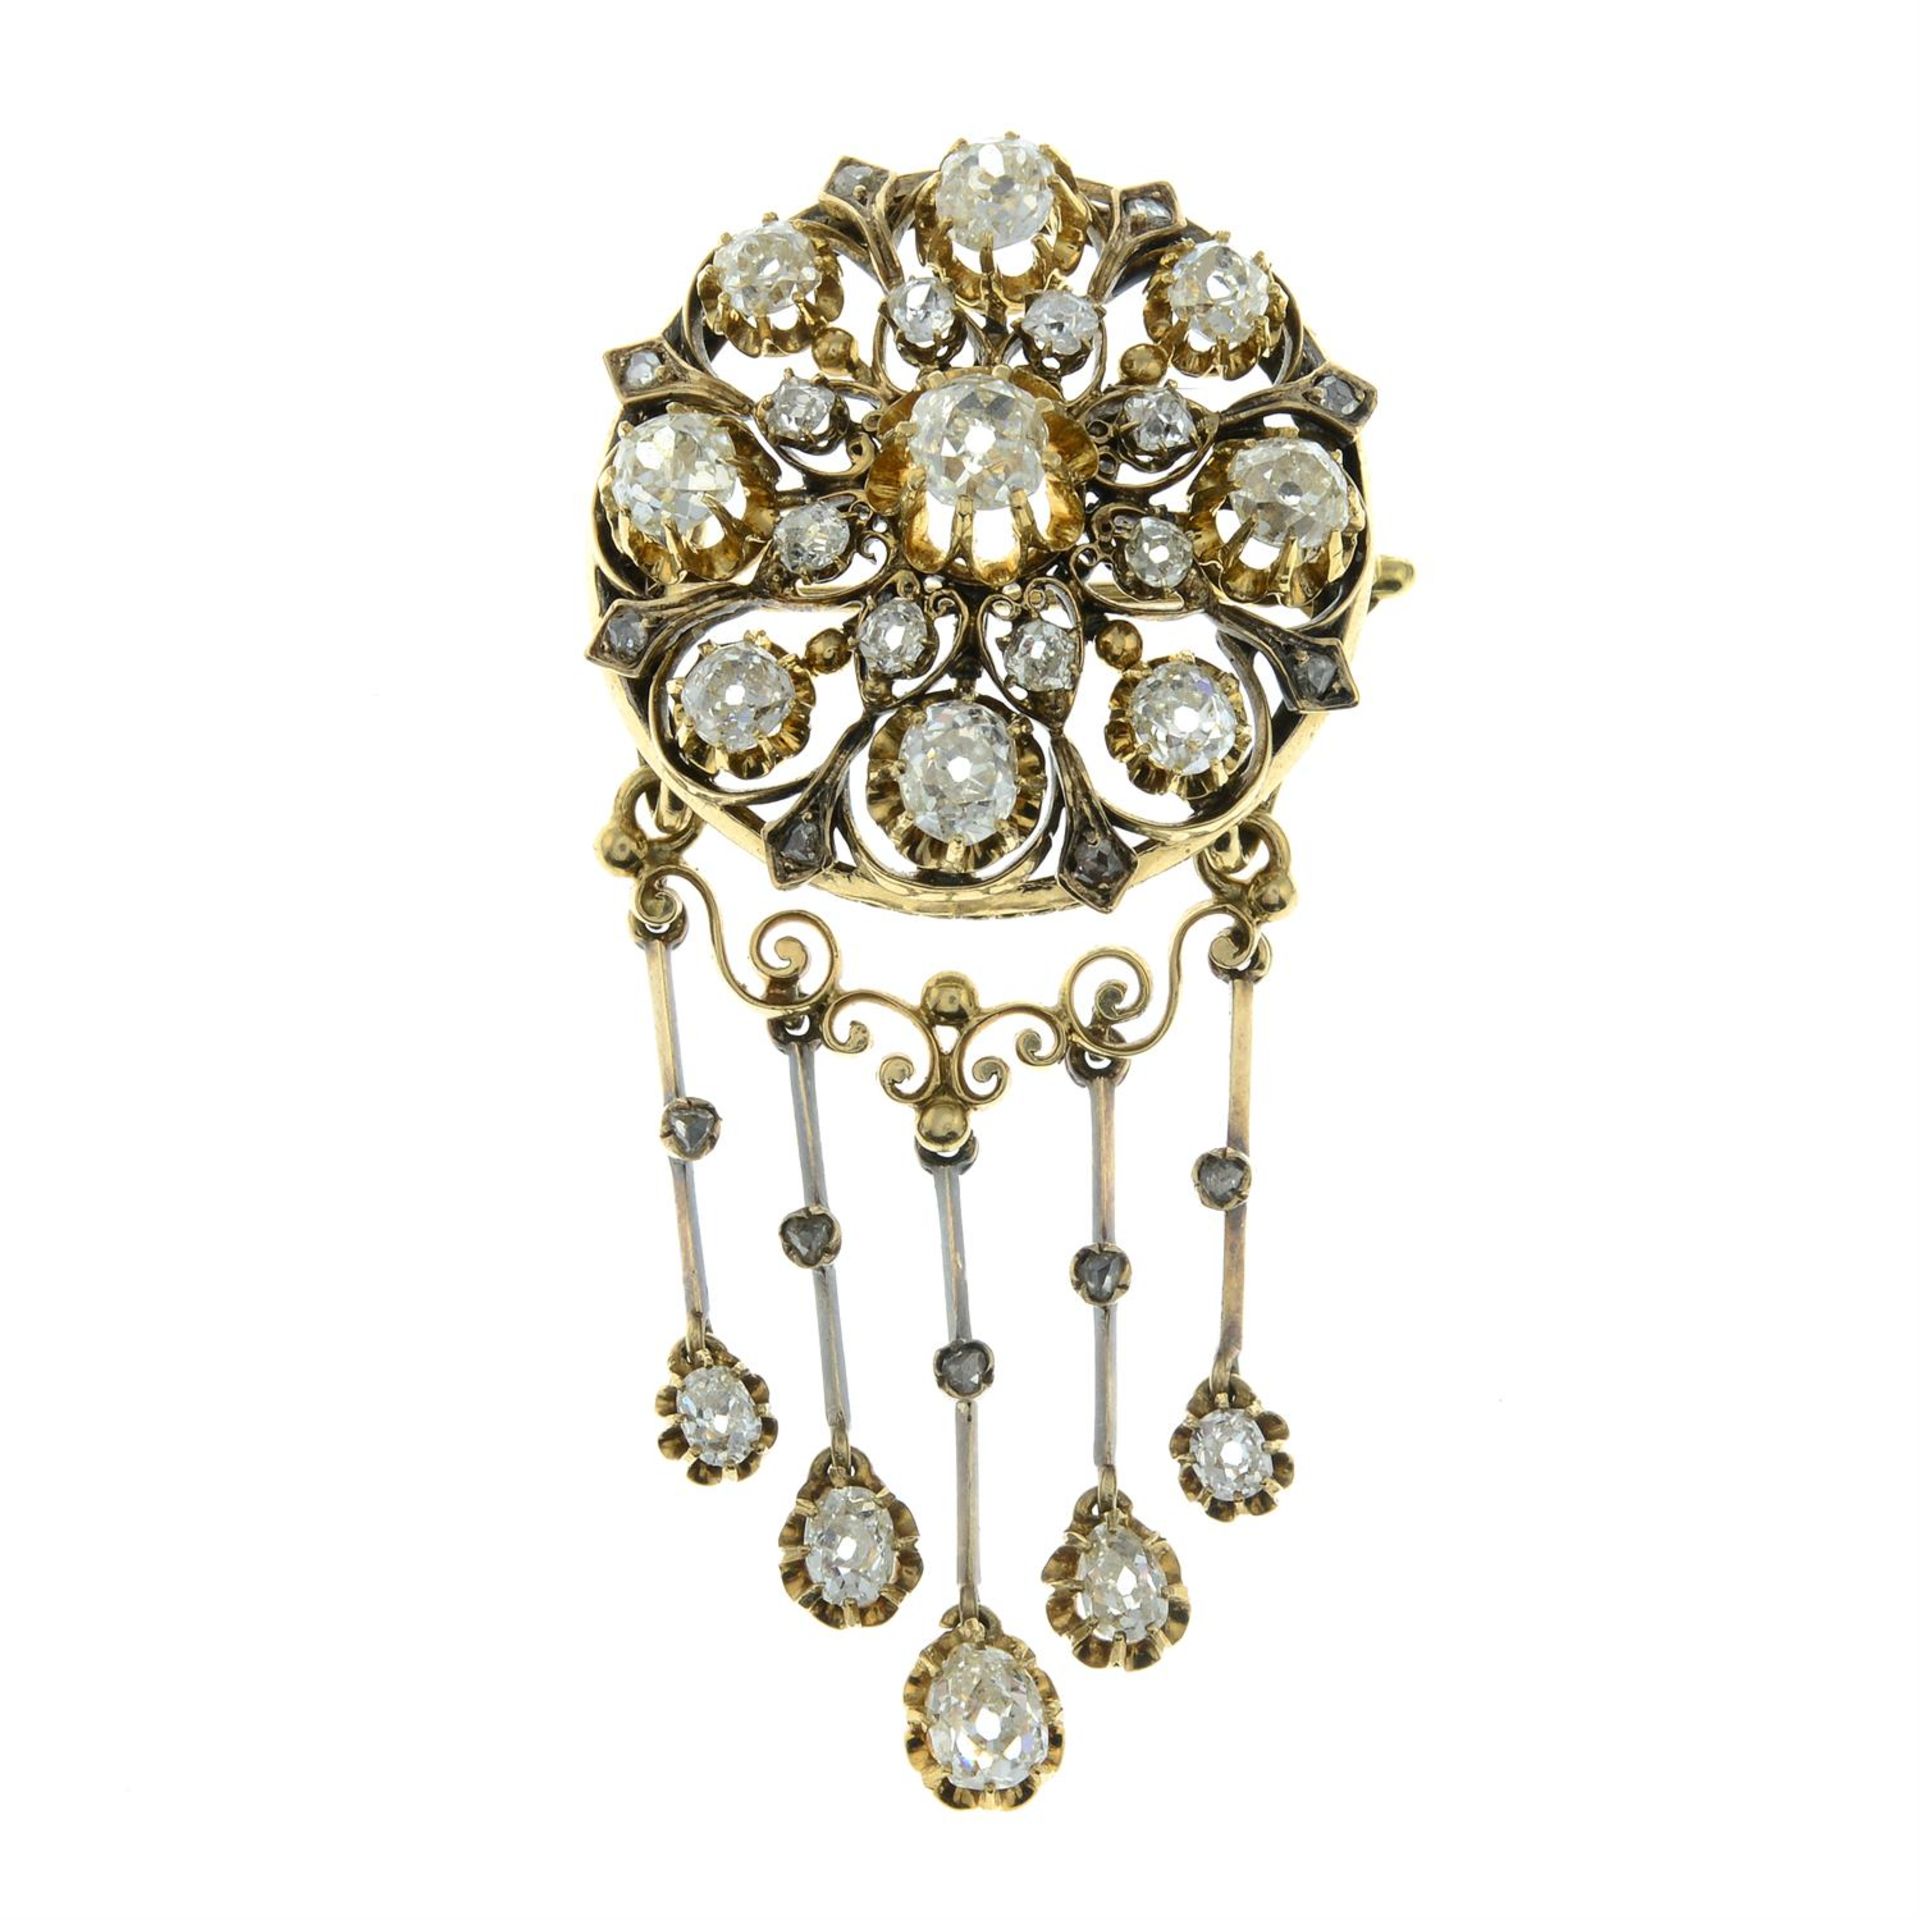 A late 19th century 18ct gold old-cut diamond fringe brooch/necklace. - Image 2 of 5